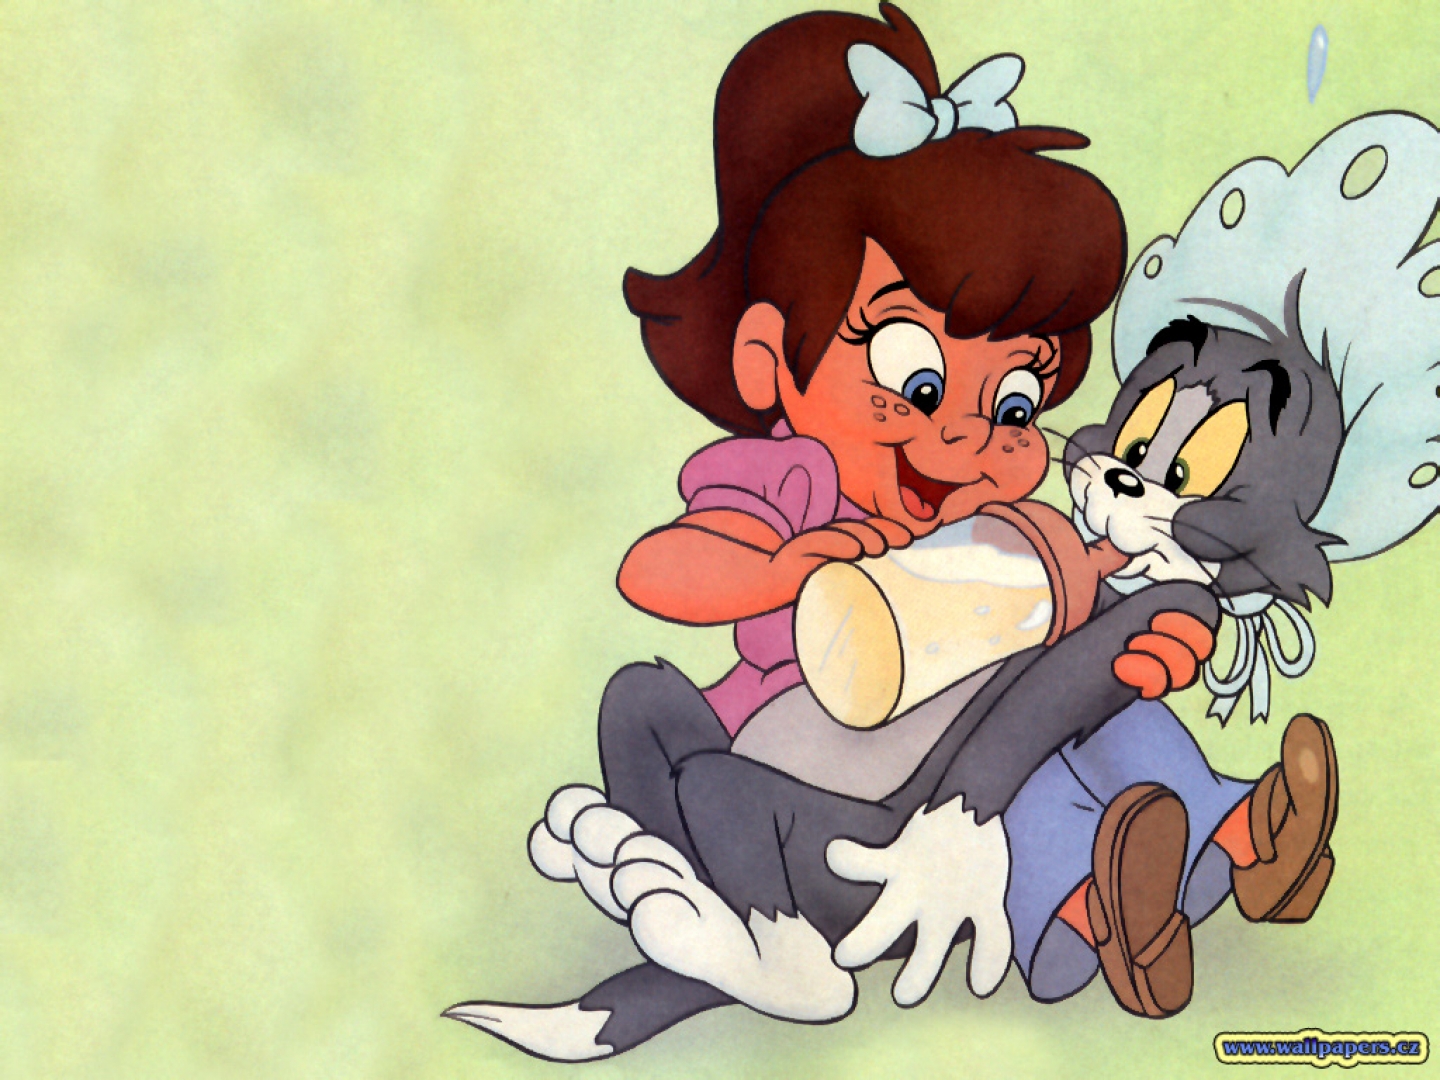 32 Tom And Jerry HD Wallpapers Backgrounds - Wallpaper Abyss